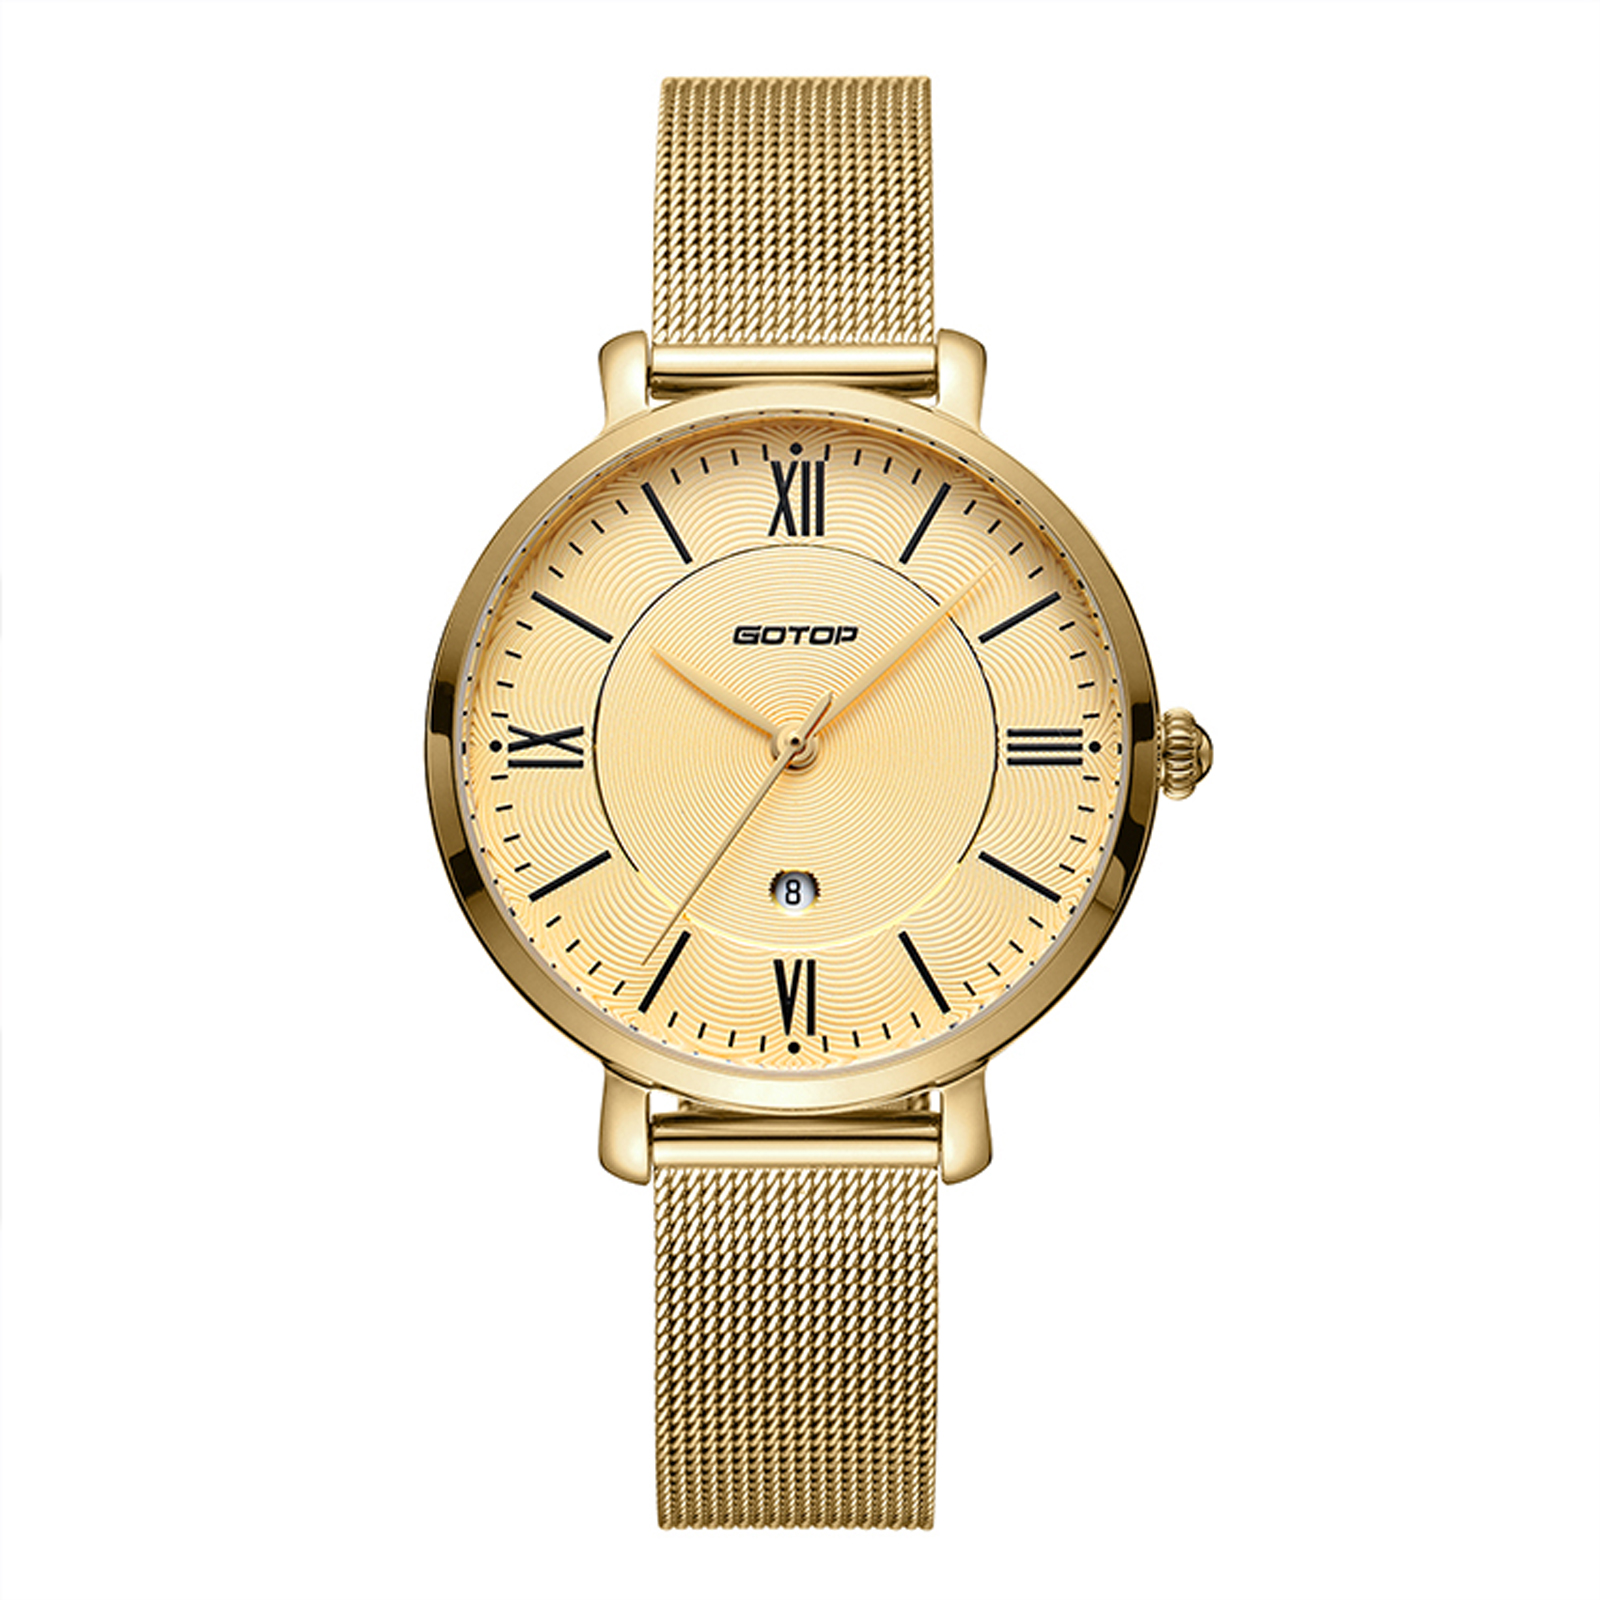 All Gold Stainless Steel Women's Watch